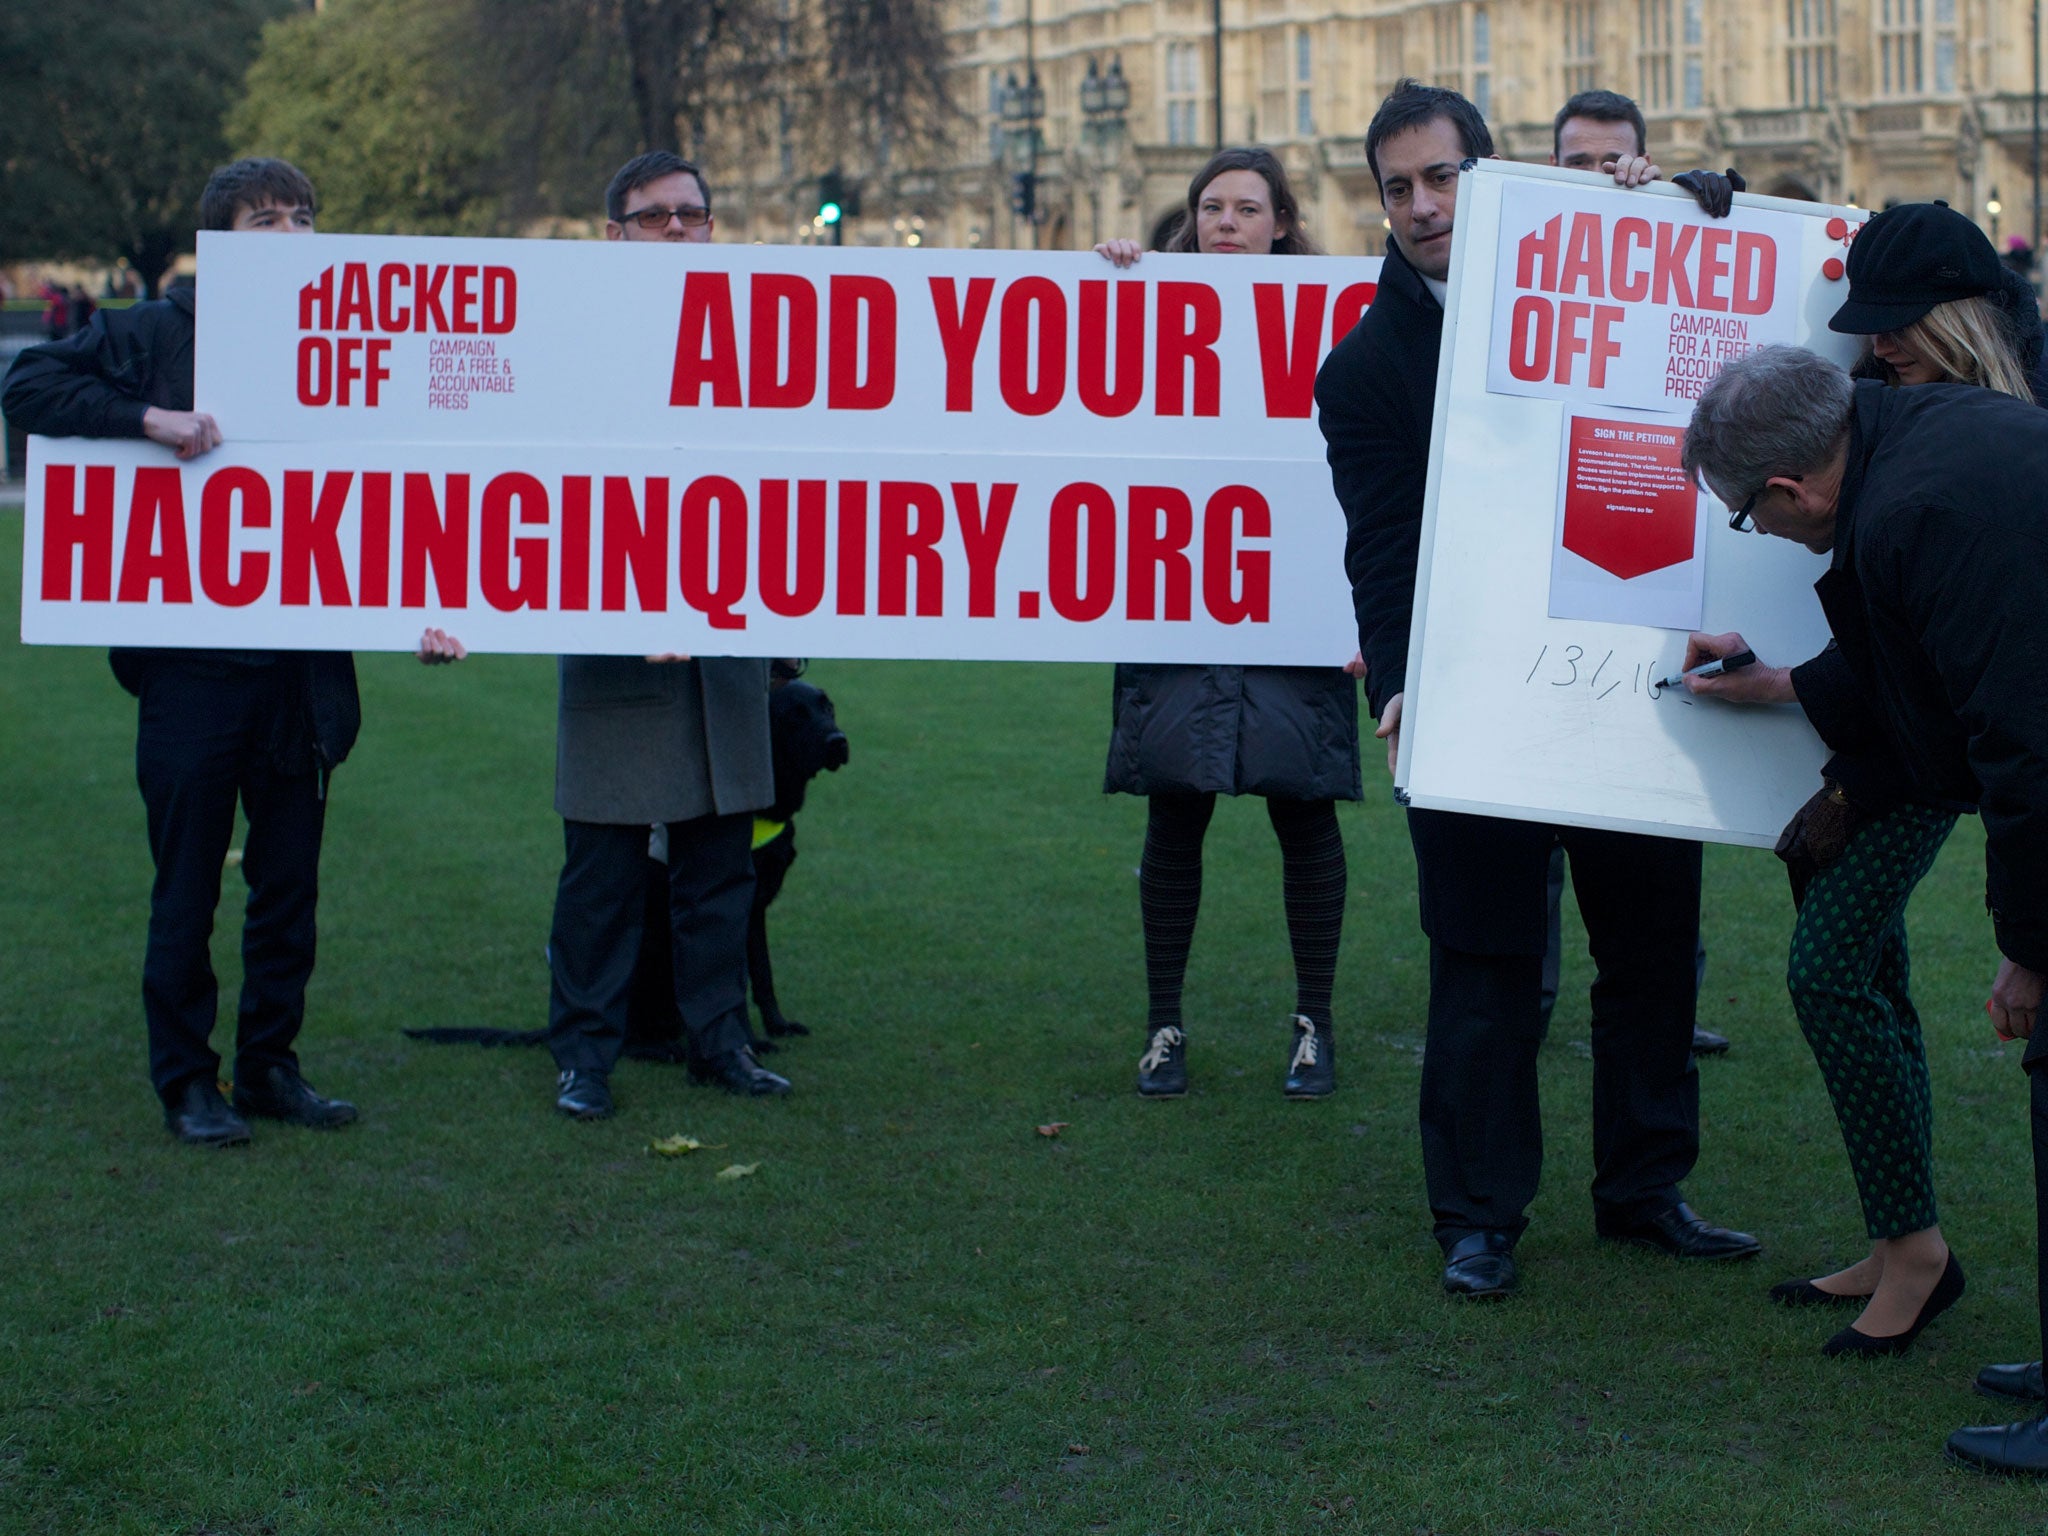 Members of the Hacked Off Campaign staging a photocall in 2012 outside Westminster to illustrate how many people have signed the petition for a free but accountable press